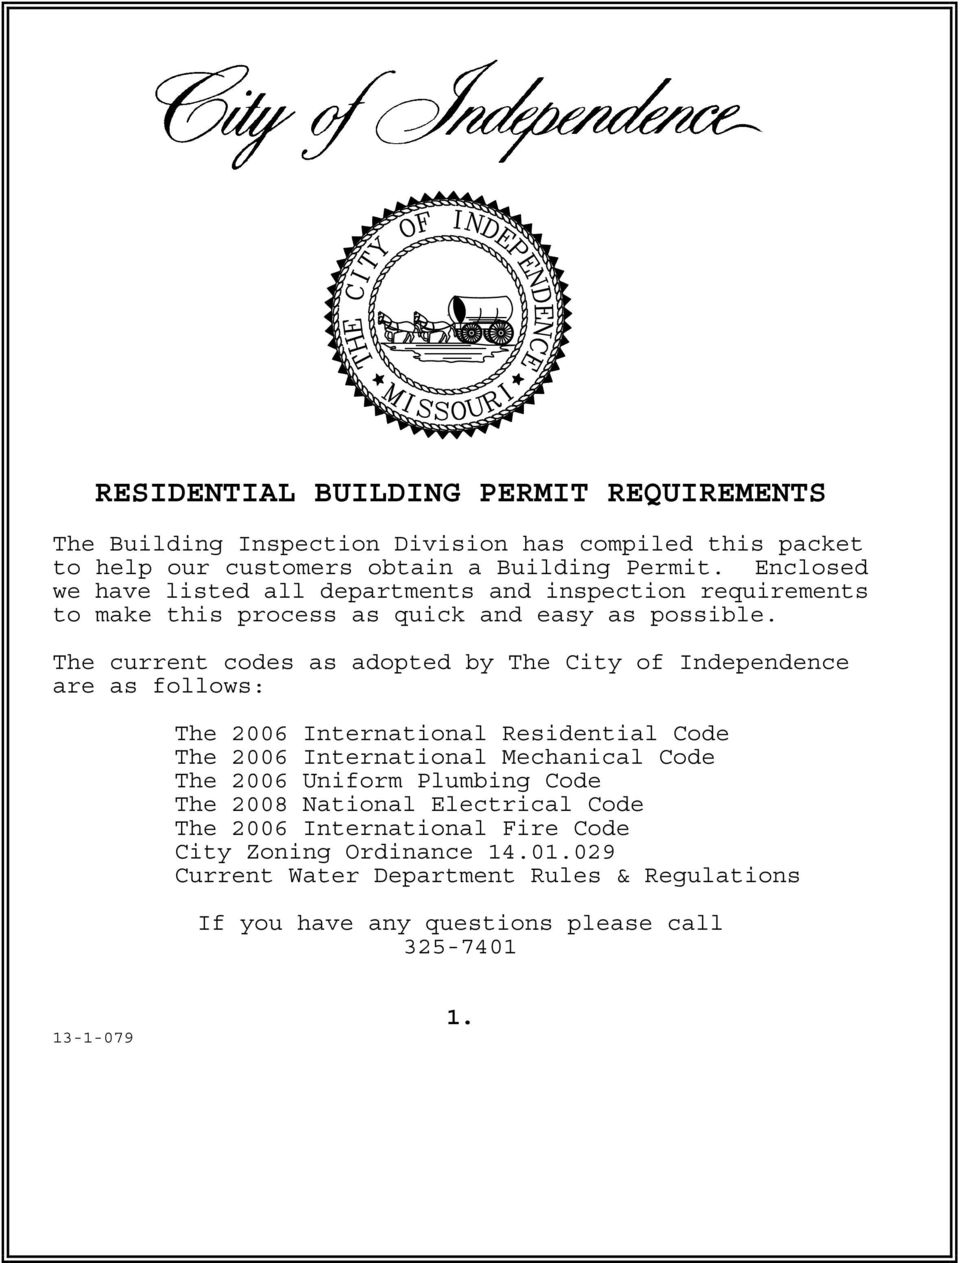 The current codes as adopted by The City of Independence are as follows: The 2006 International Residential Code The 2006 International Mechanical Code The 2006